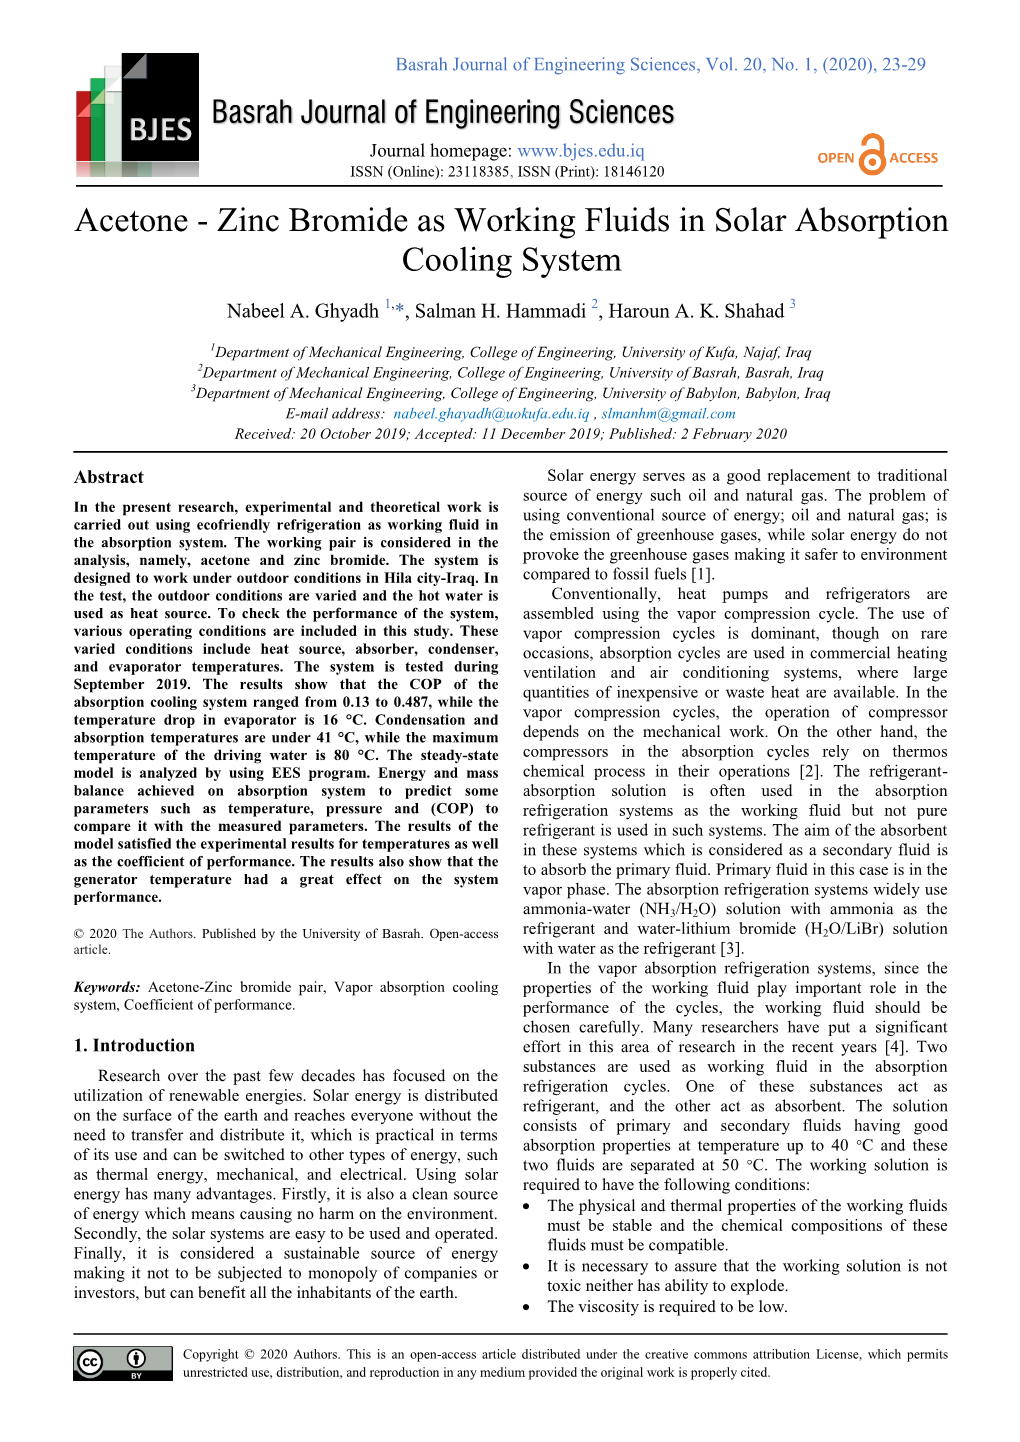 Zinc Bromide As Working Fluids in Solar Absorption Cooling System